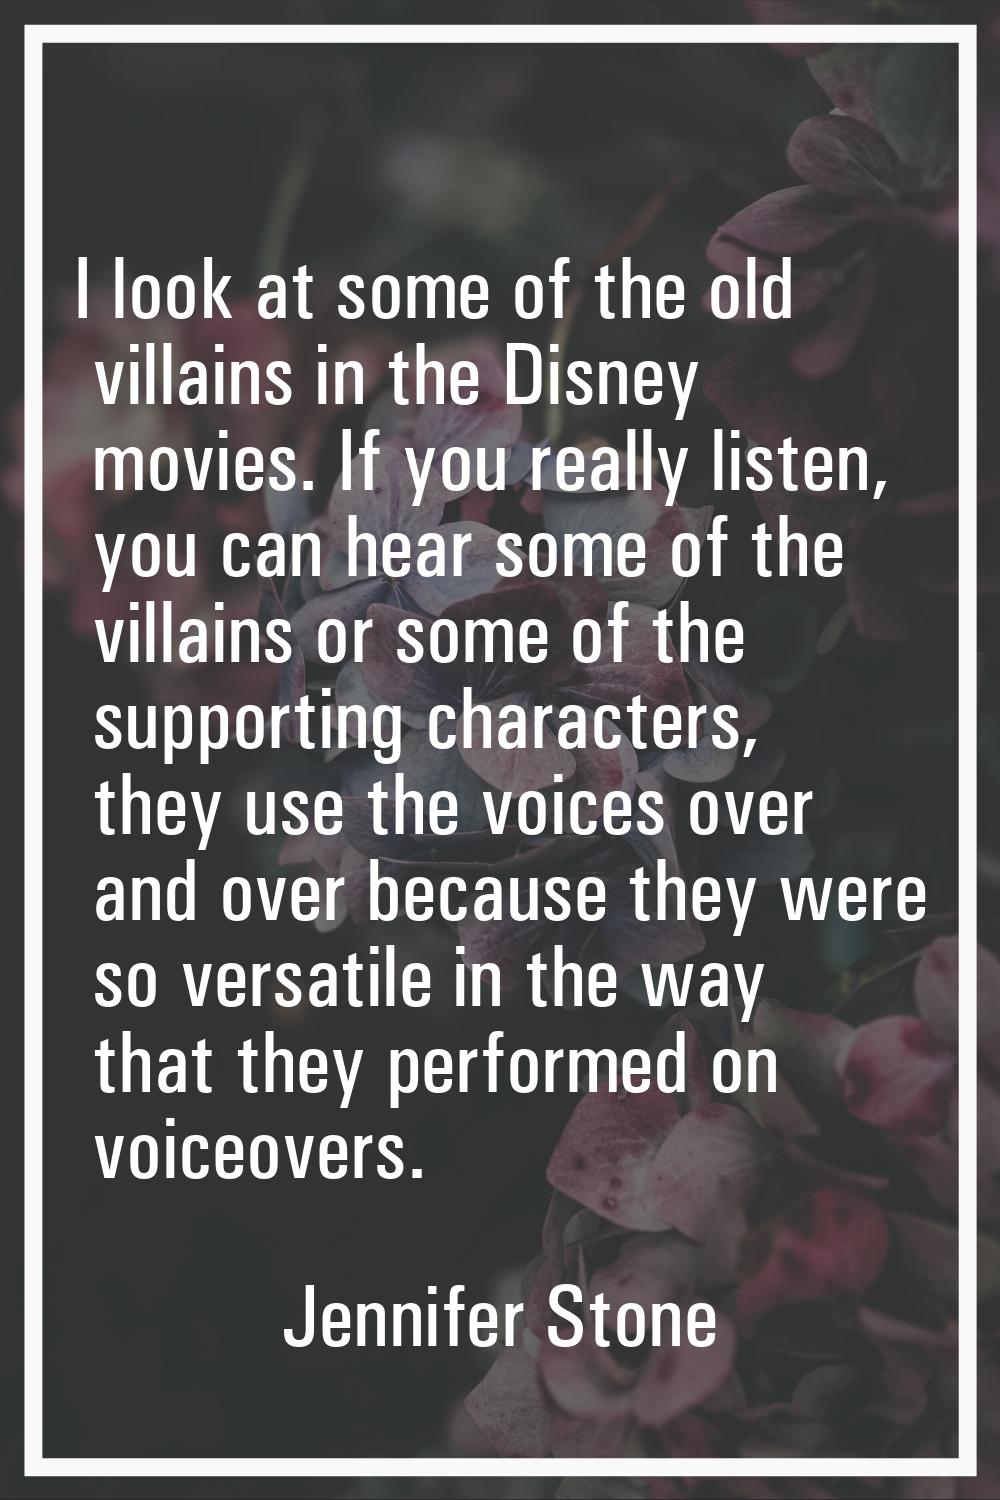 I look at some of the old villains in the Disney movies. If you really listen, you can hear some of